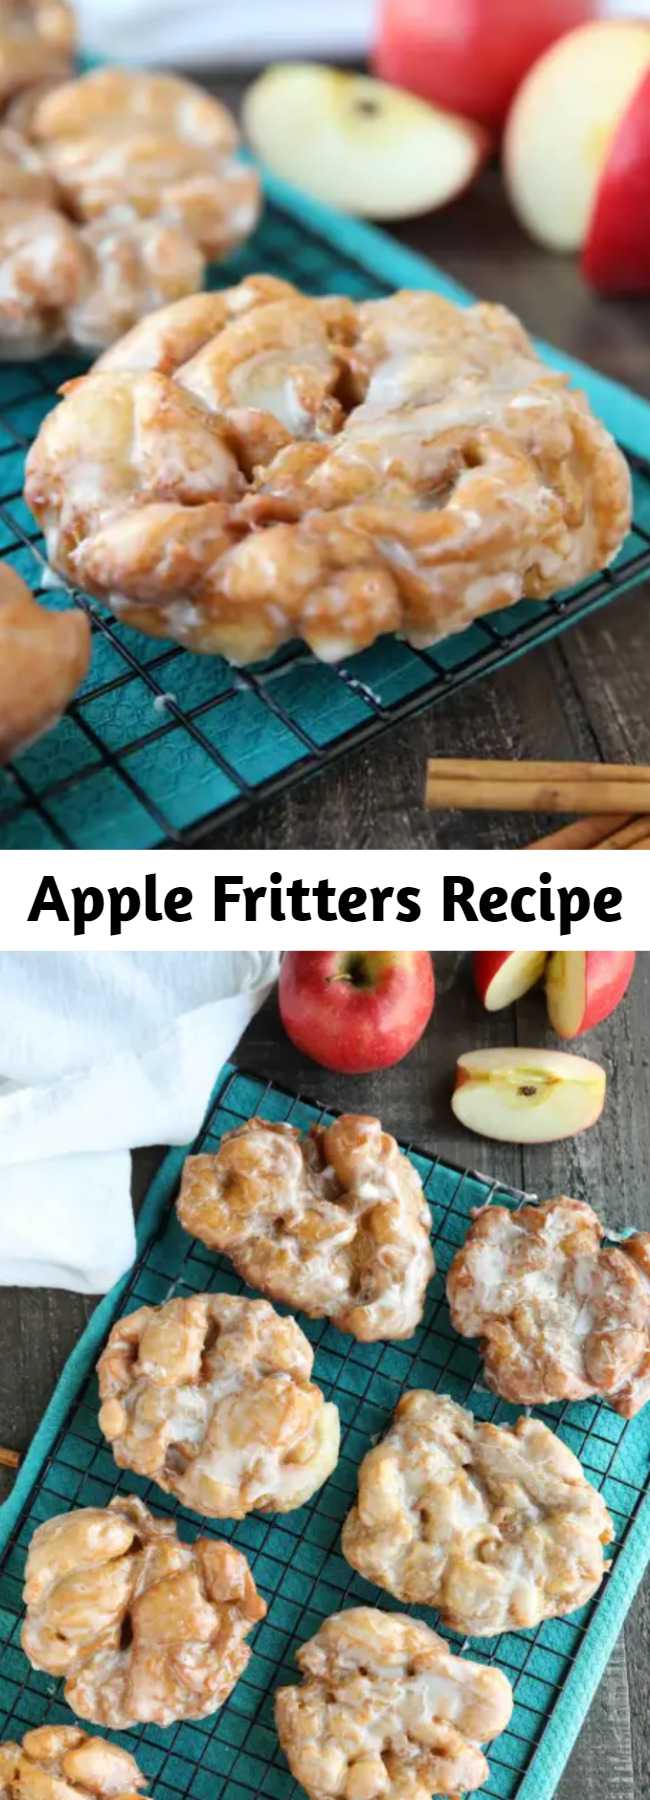 Apple Fritters Recipe - an easy and delicious yeast doughnut with chunks of apples, ground cinnamon, and a sweet glaze.